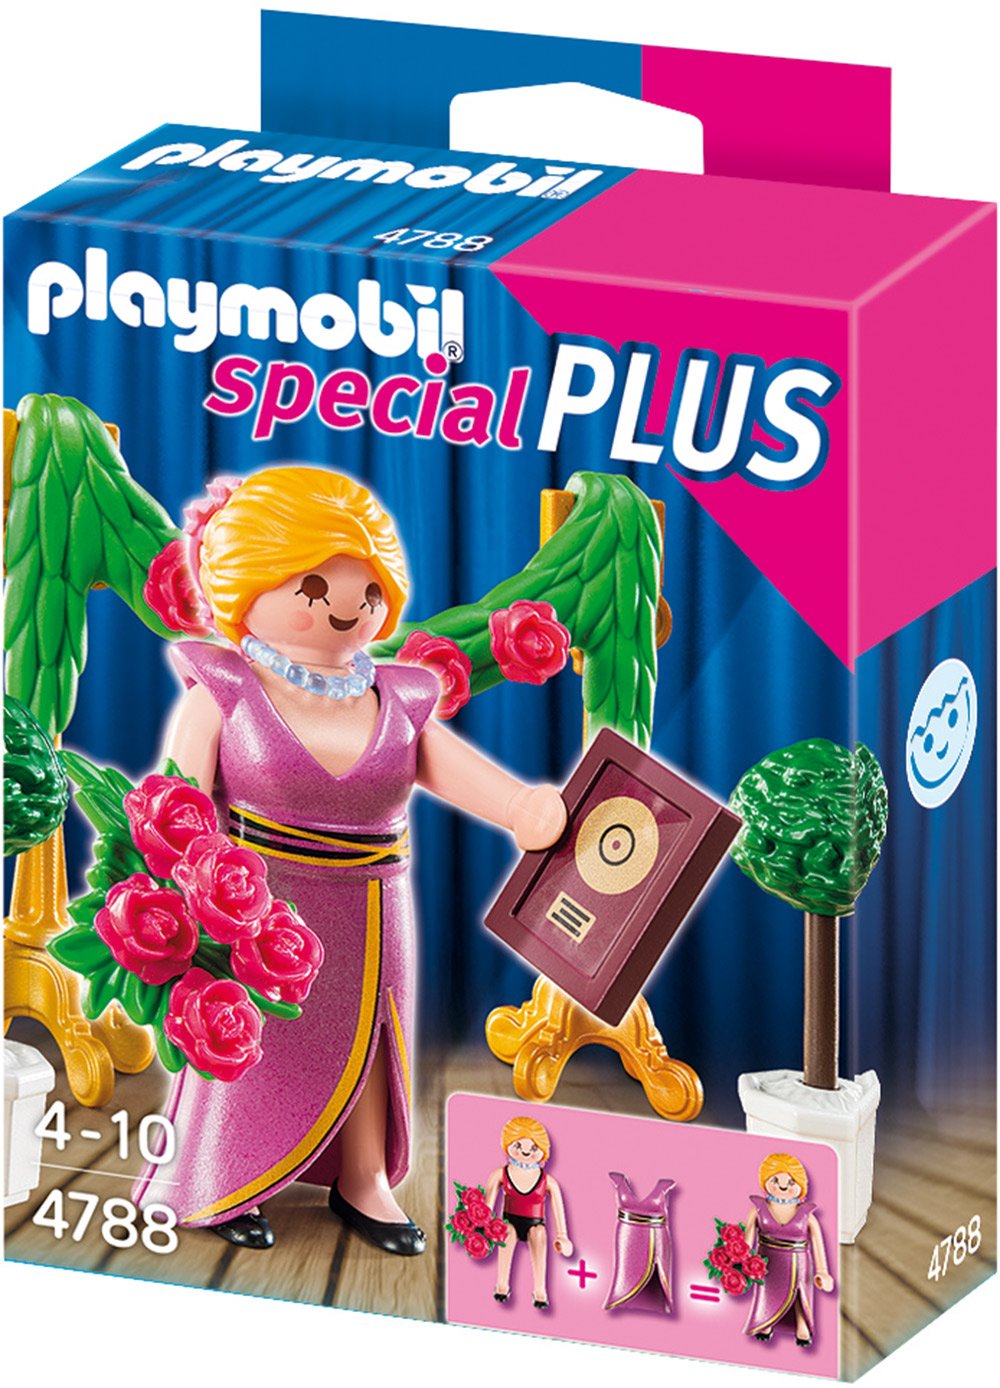 Playmobil Specials Plus Celebrity With Award Figures